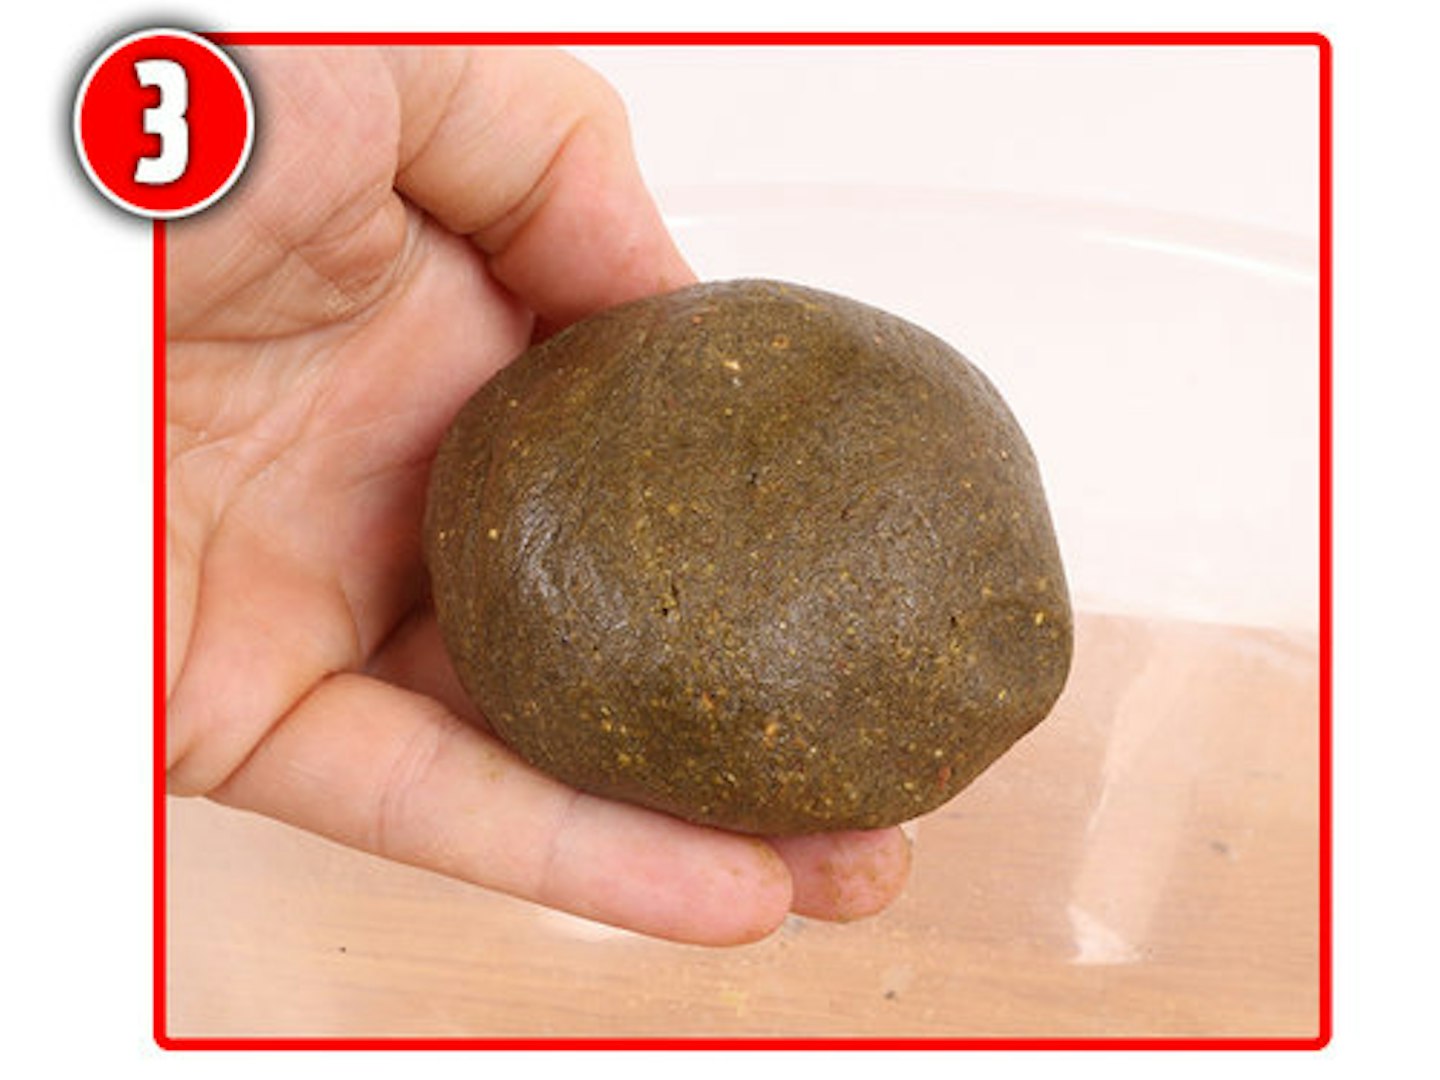 HOW TO MAKE YOUR OWN BOILIES